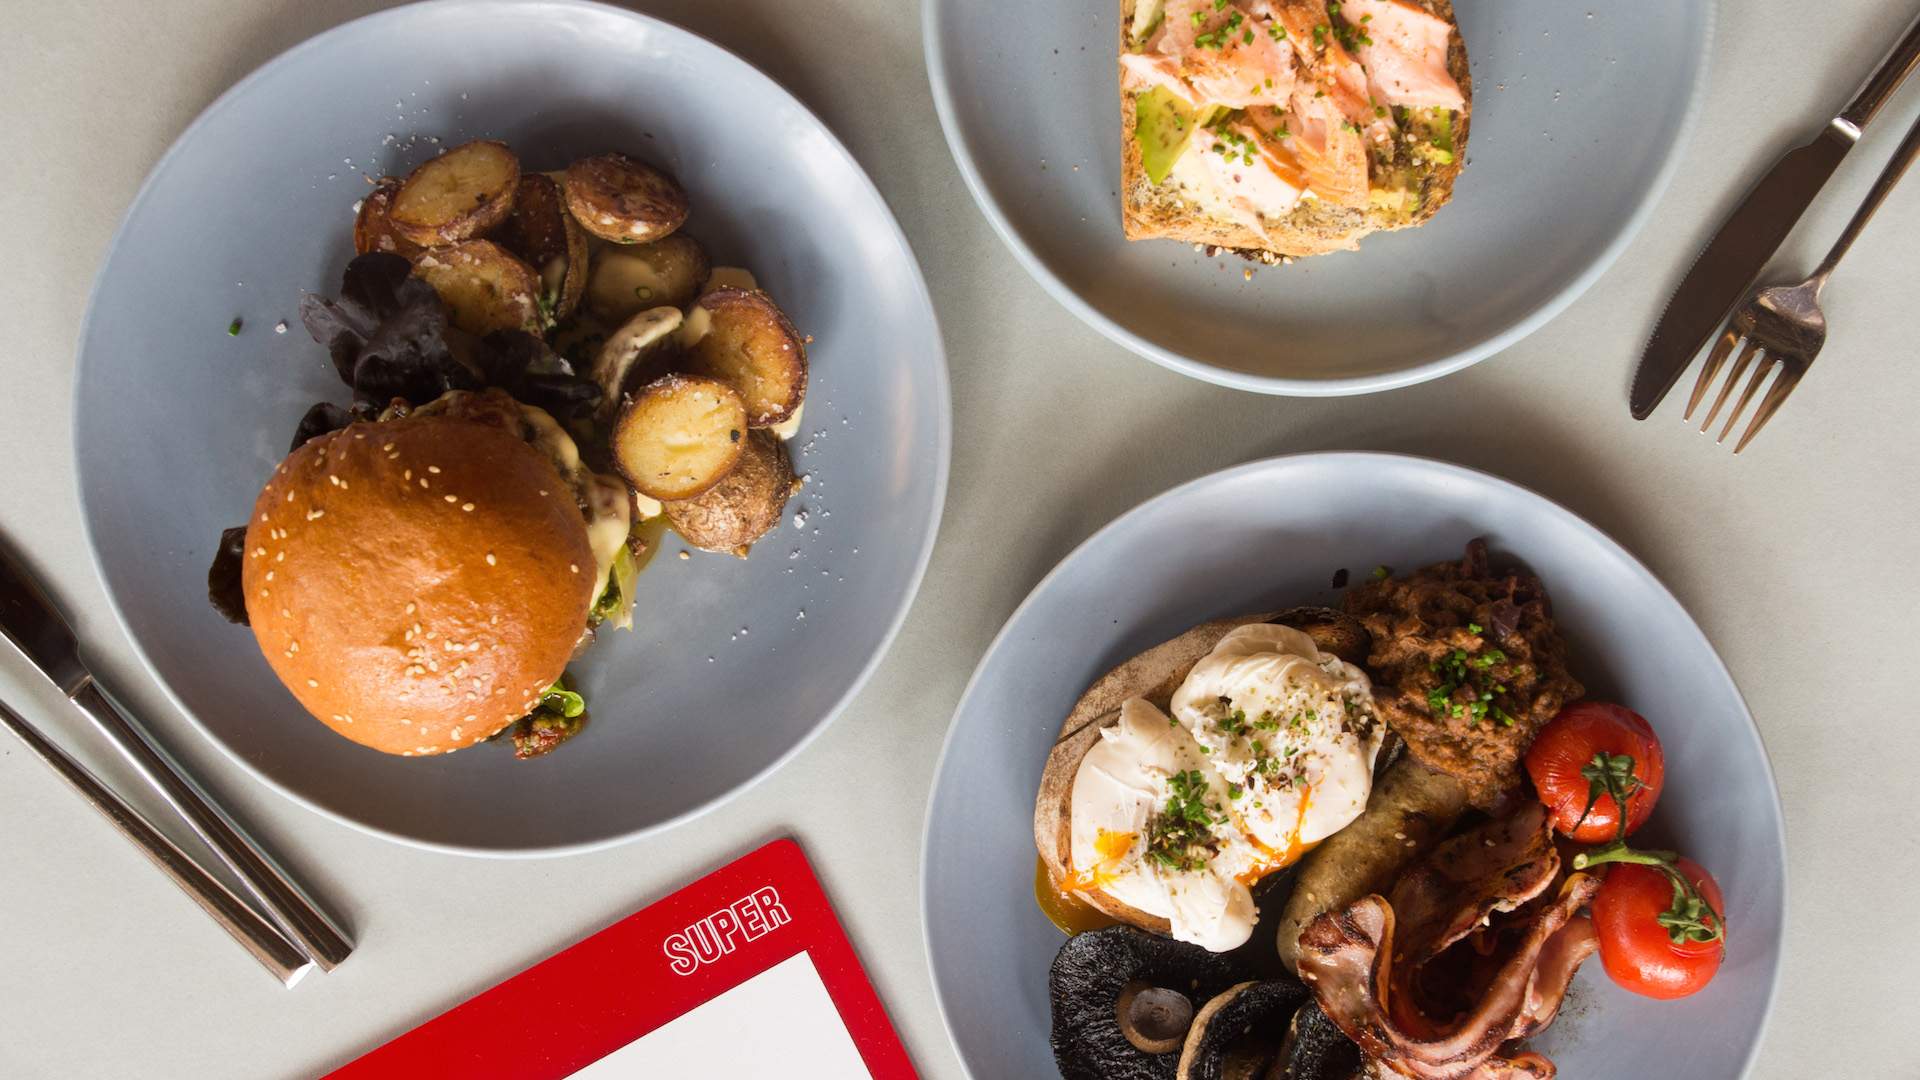 This Britomart Restaurant Has Relaunched as a Neighbourhood Corner Cafe